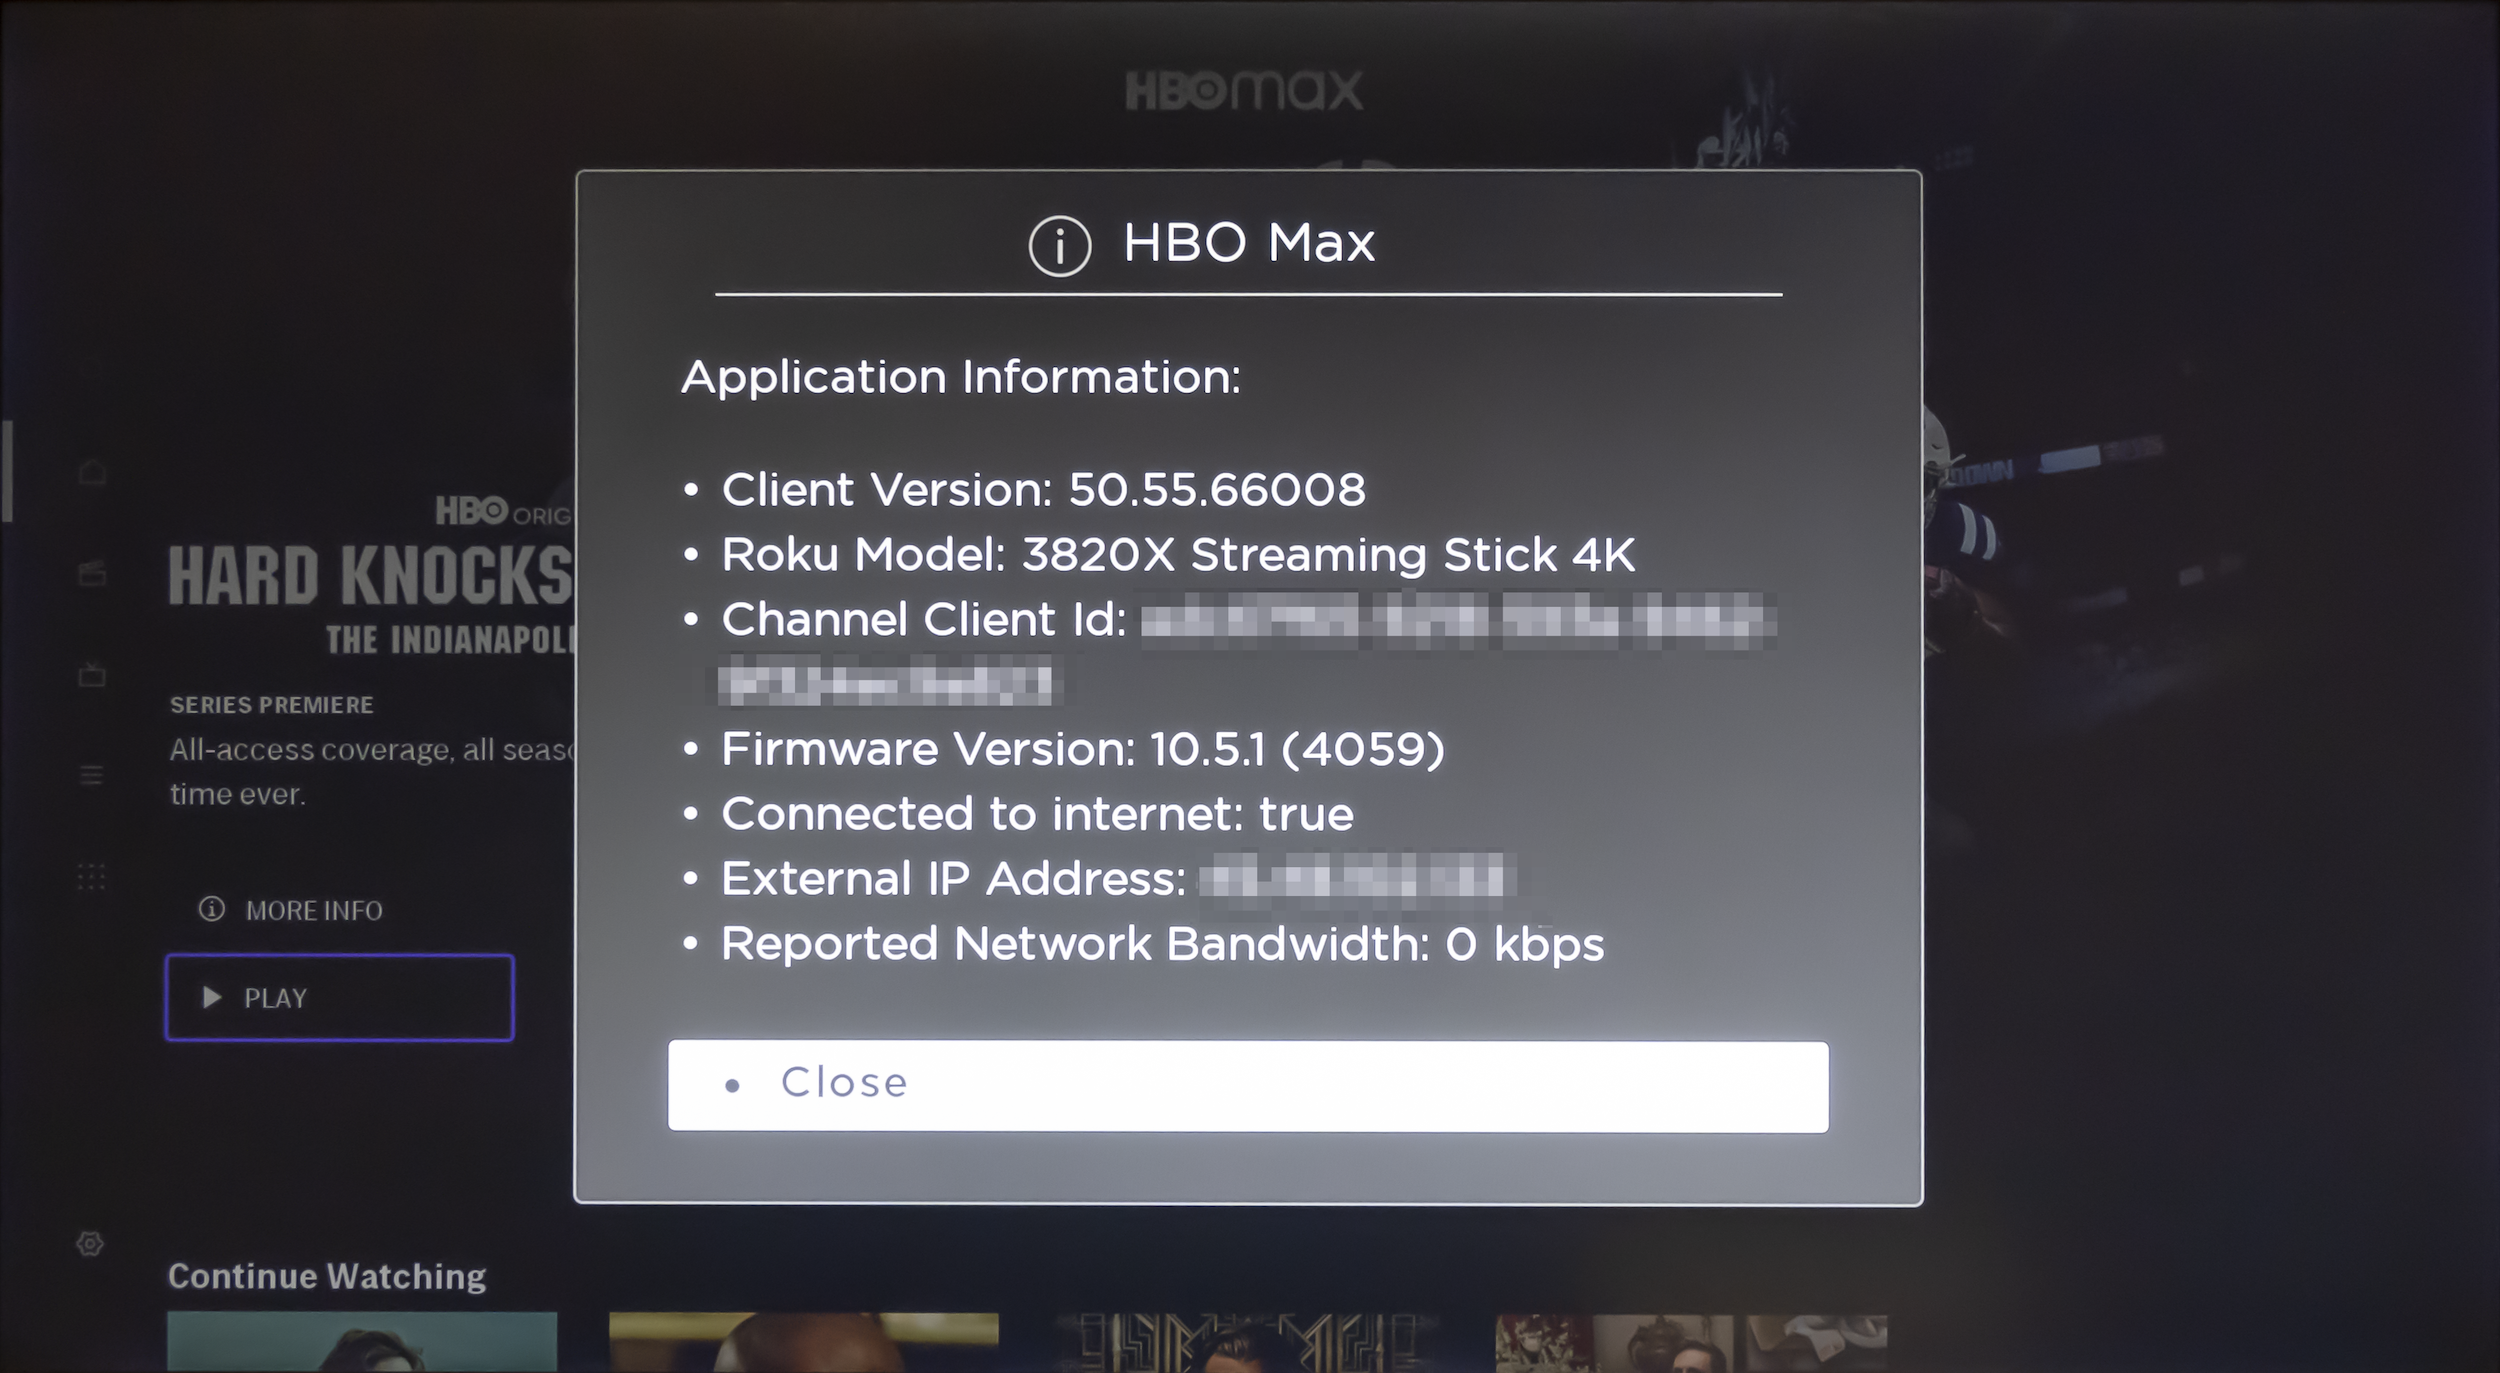 Screenshot of the details pop-up for HBO Max